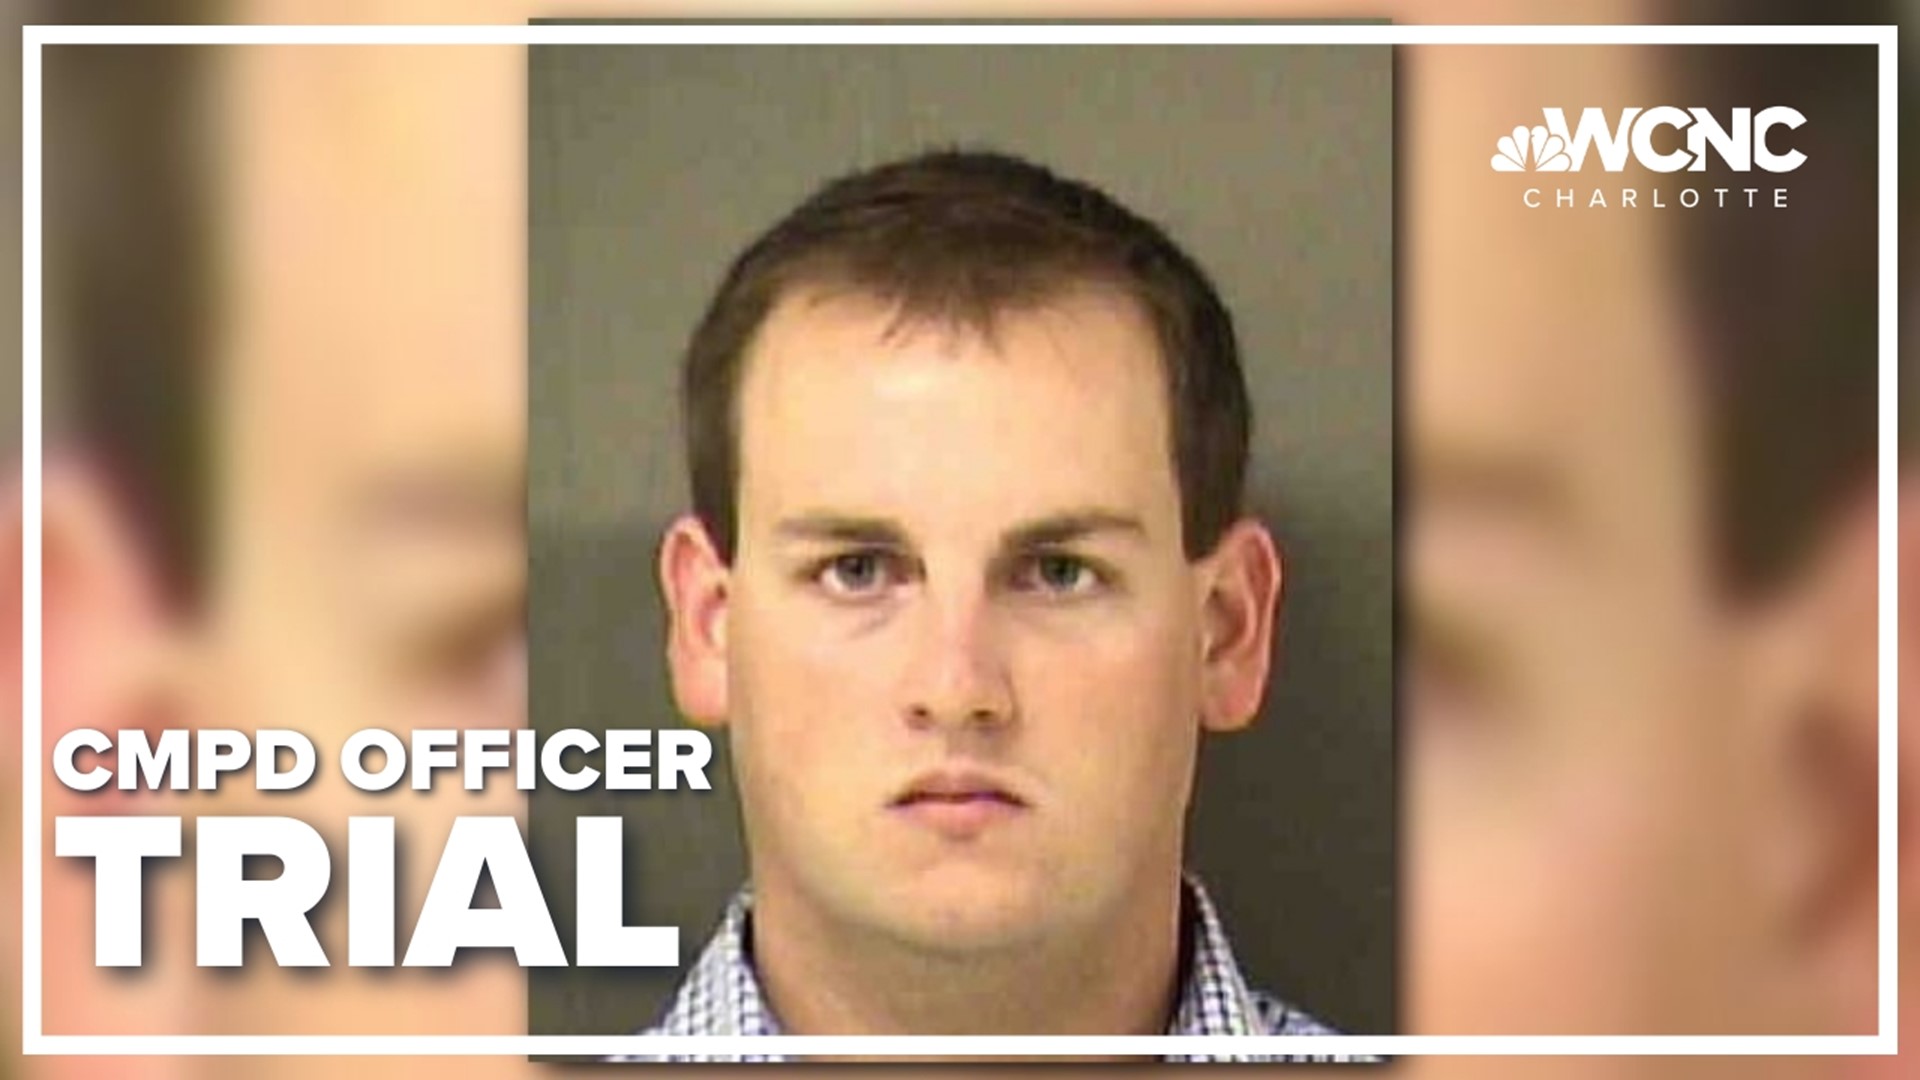 Jury selection continued today for the trial of CMPD Officer Phillip Barker.